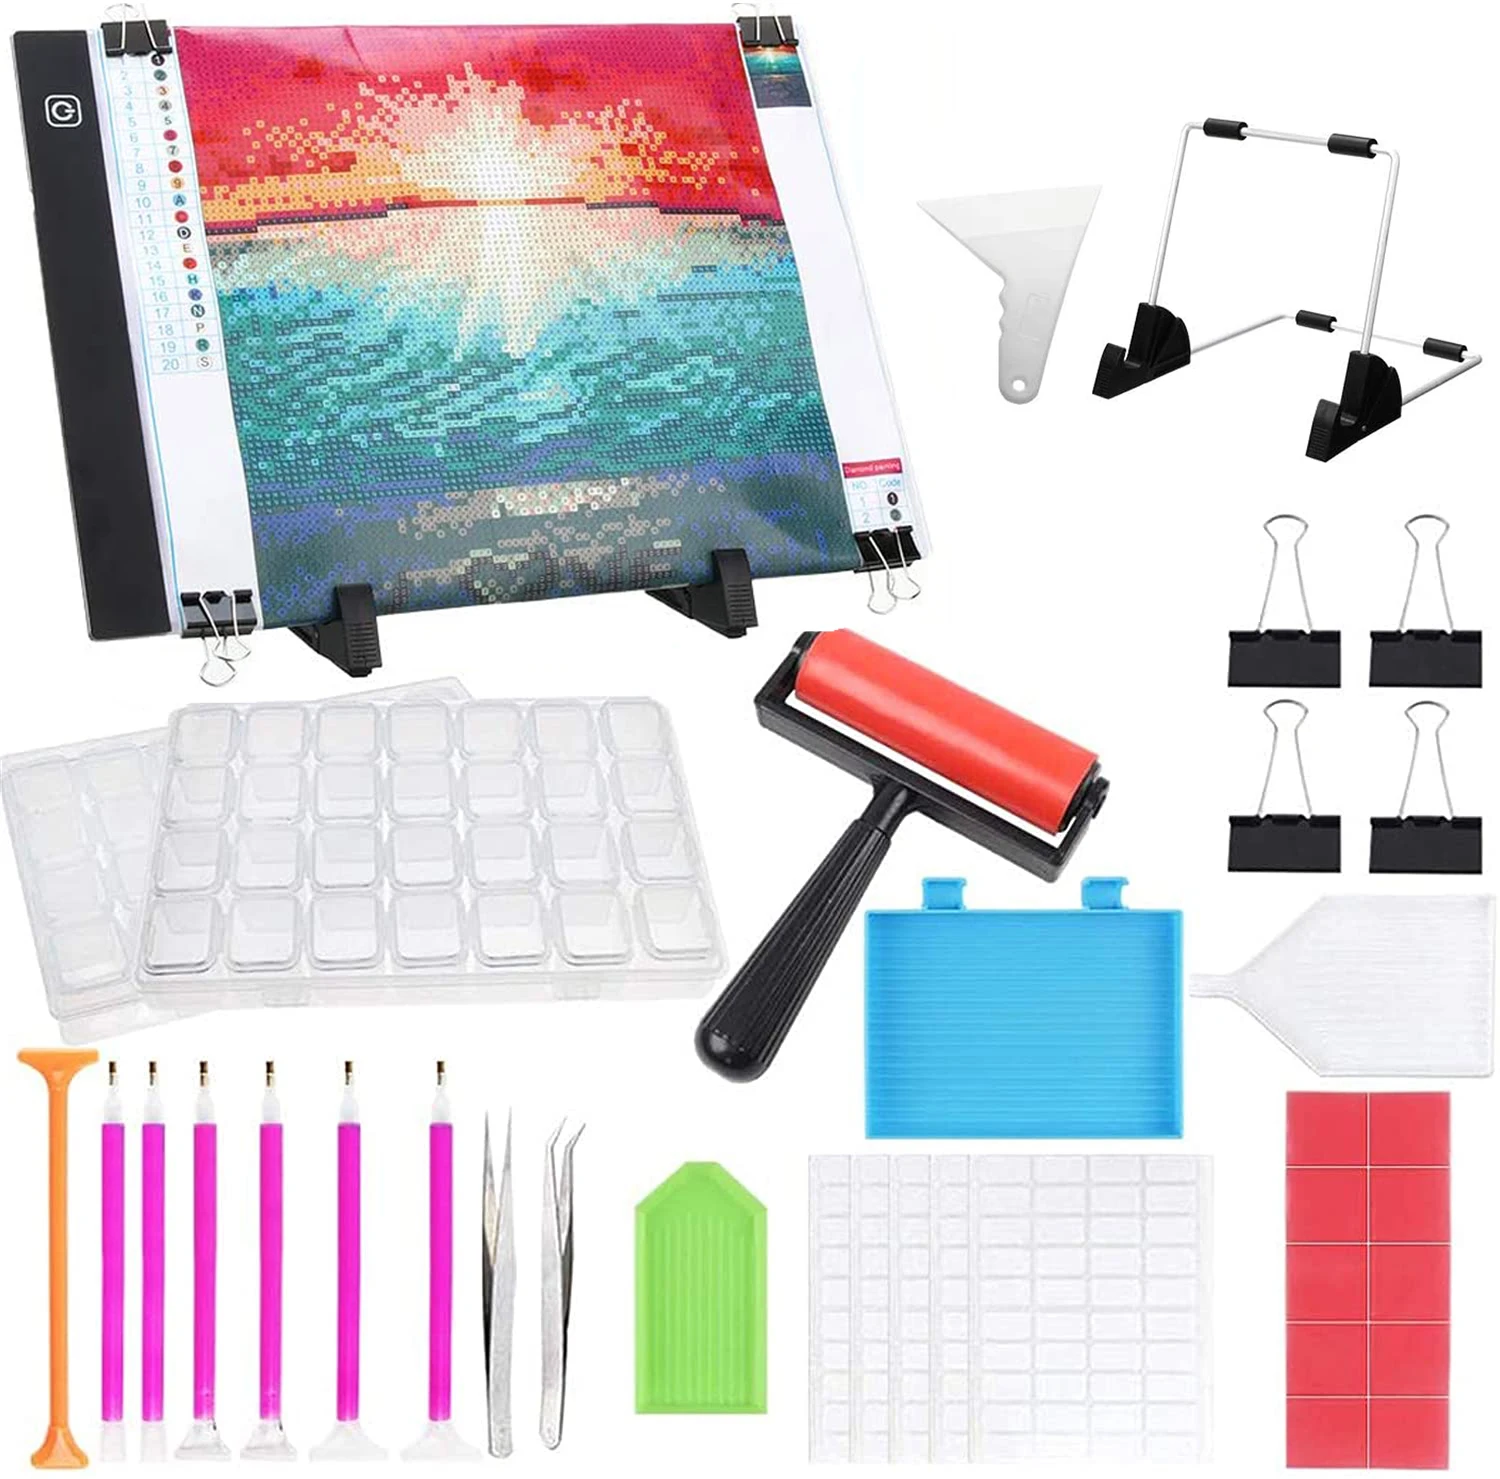 5D Diamond Painting Accessory  High Quality Easy Using Light Pad Diamond Painting Tools And Accessories Kit For Adults And Kids